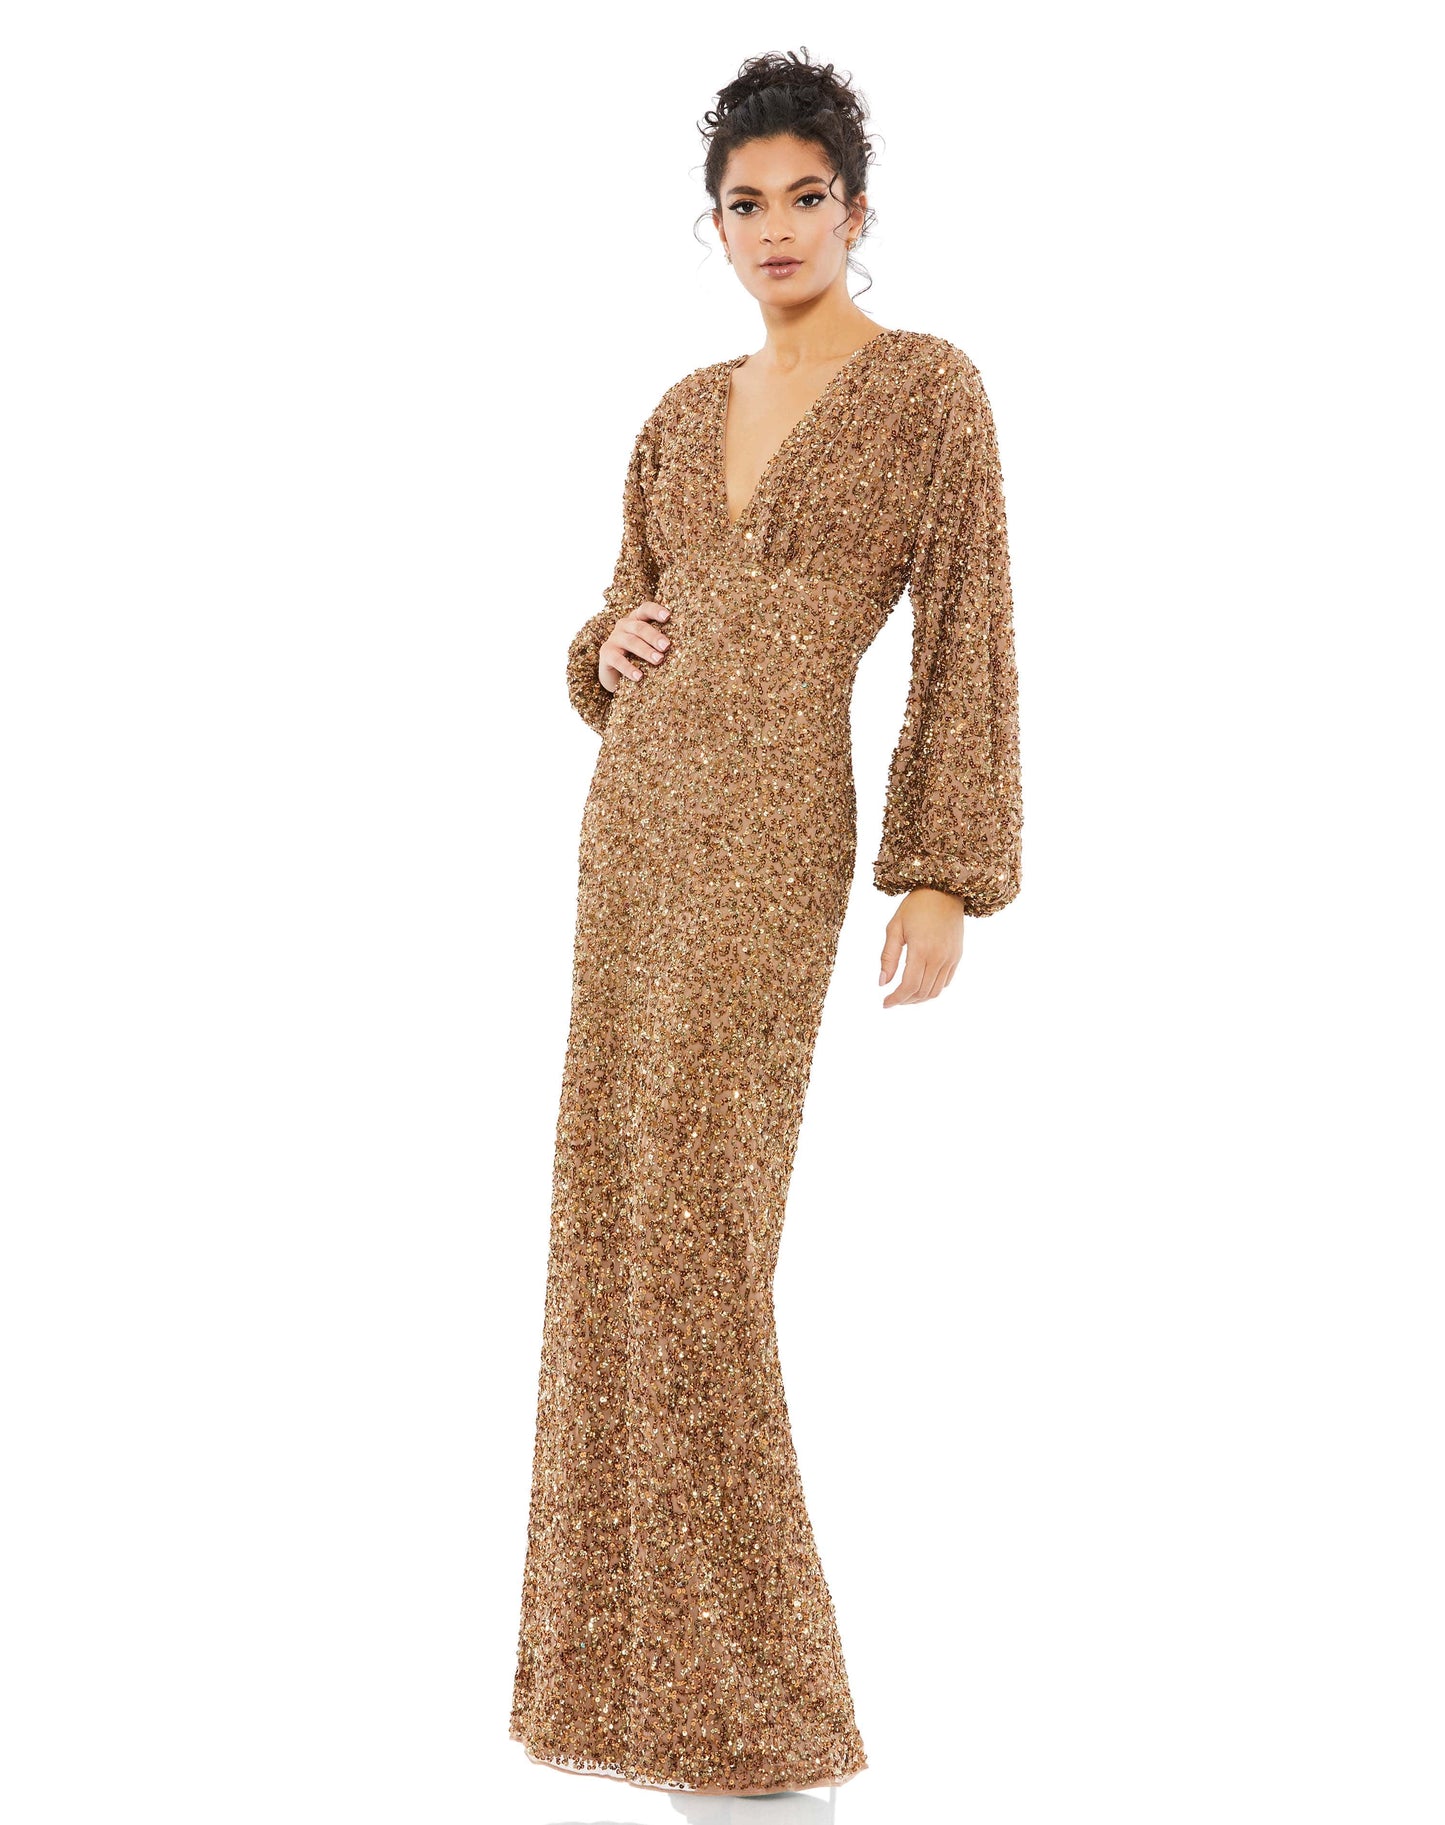 This chic evening gown will make heads turn. With a plunging V-neckline, a wide inset waistband, and a body-skimming full length skirt, this ultra-flattering dress is perfect for any formal event. Mac Duggal Back zipper Hand-sewn sequins on mesh fabric (1